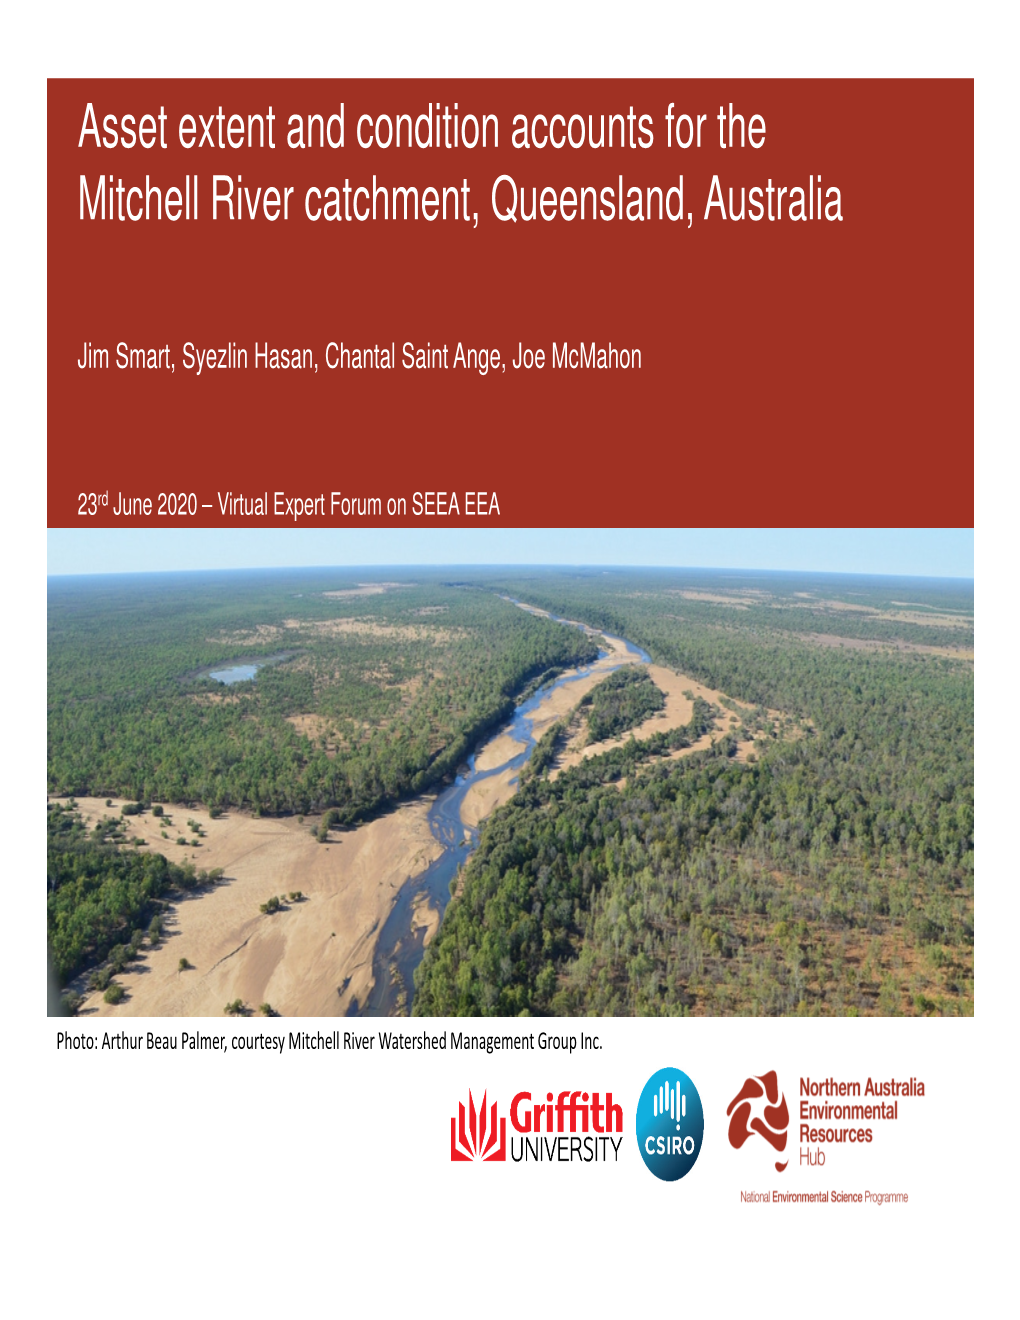 Asset Extent and Condition Accounts for the Mitchell River Catchment, Queensland, Australia